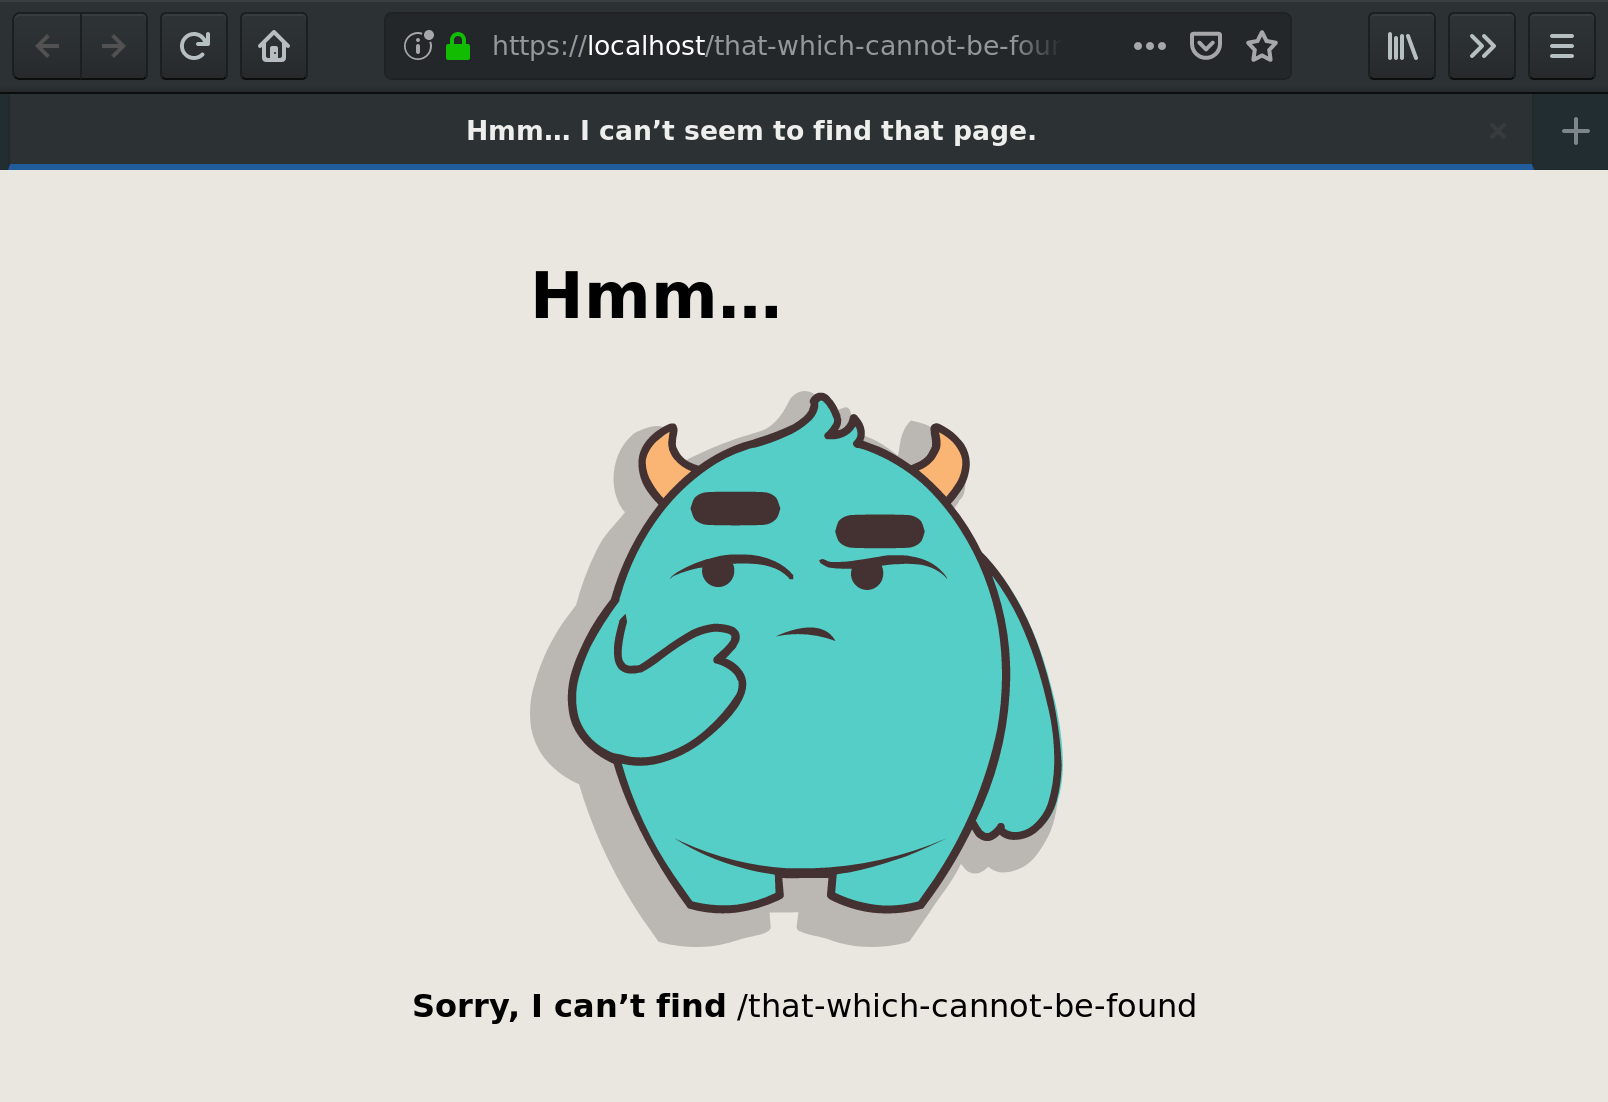 Screenshot of the custom 404 error page included in the unit tests